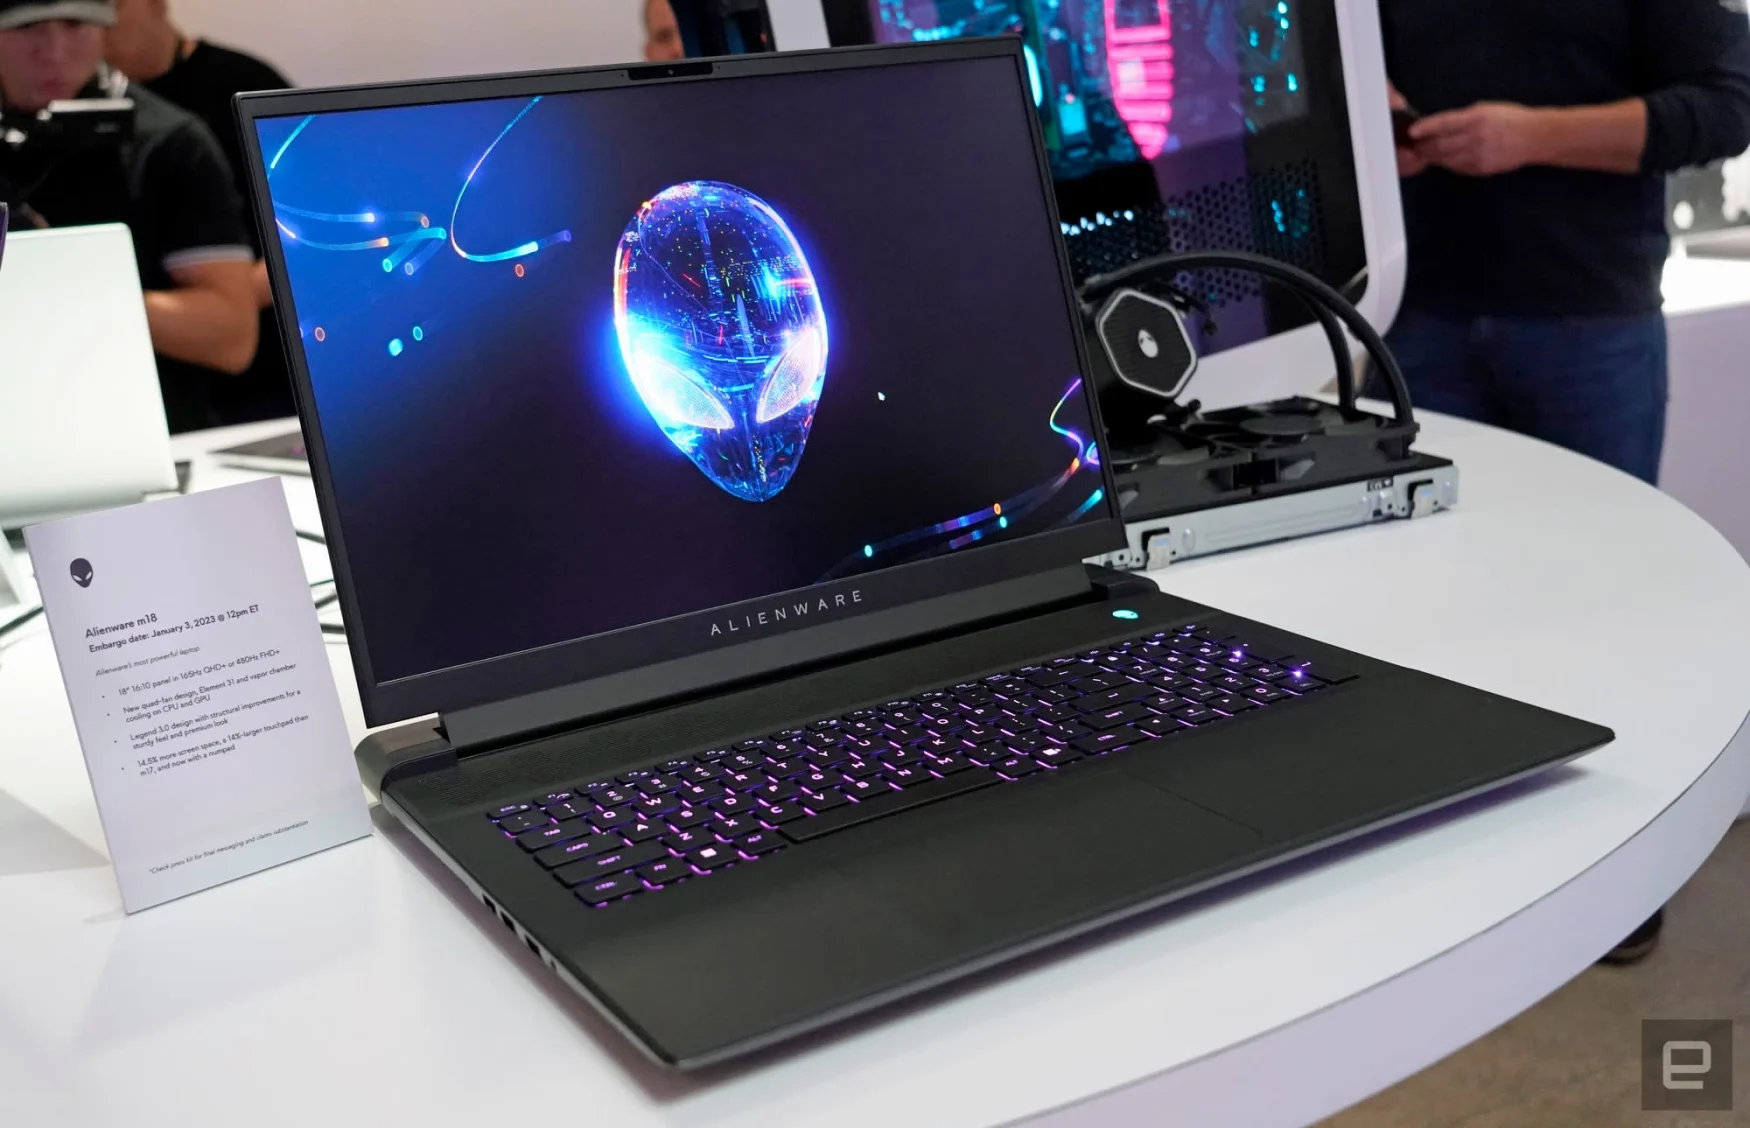 CES showcase image of the Alienware m18 laptop.  The dark laptop sits on a white table with an alien logo on the screen.